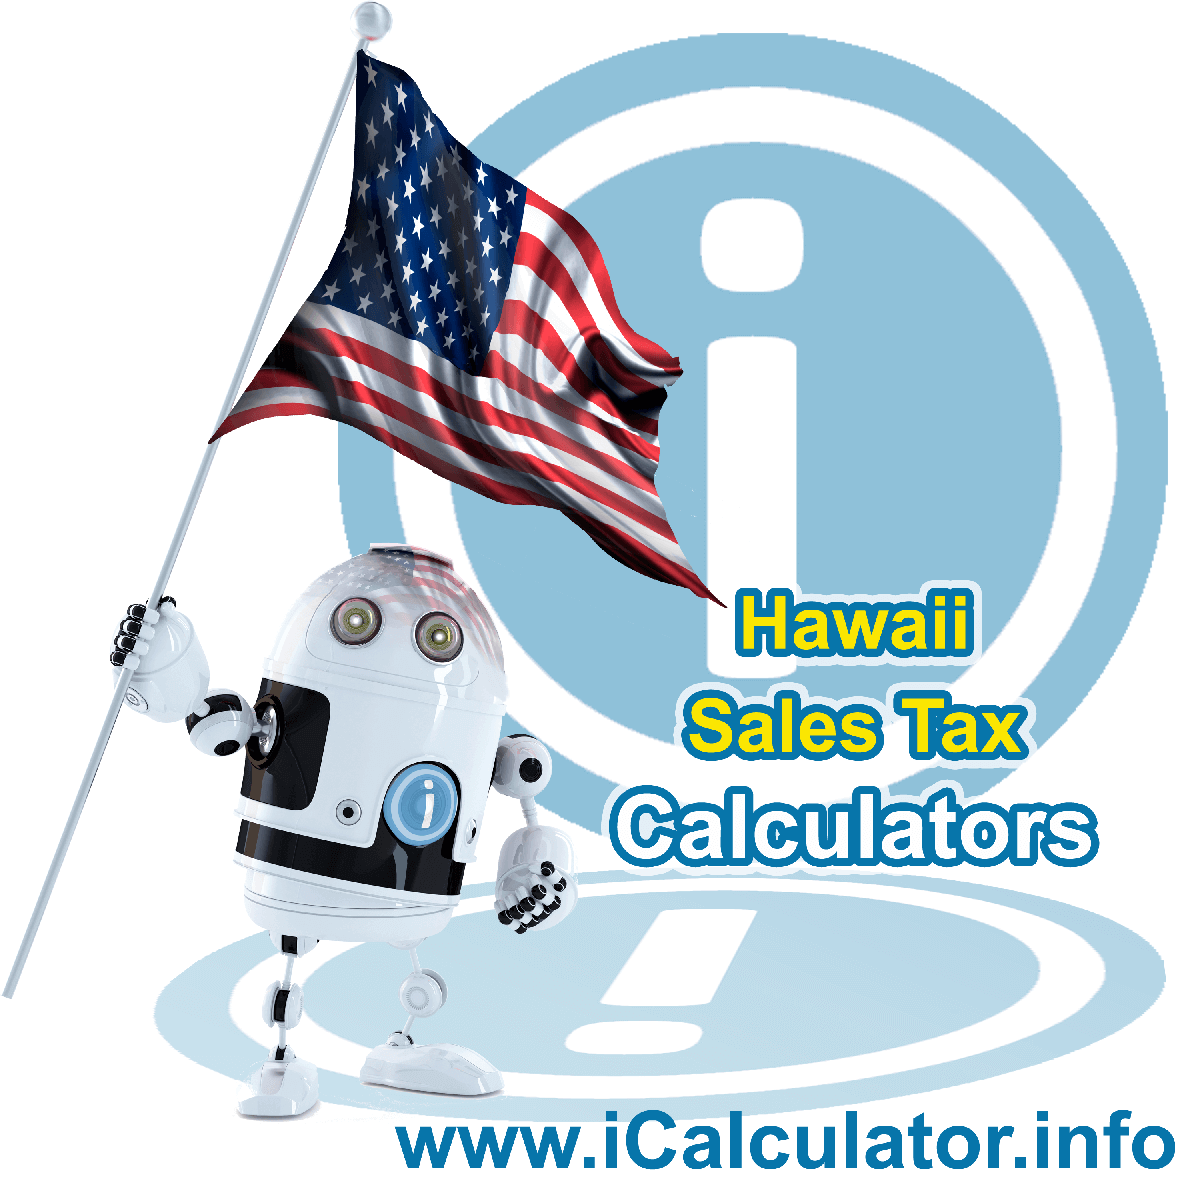 Kahului Sales Rates: This image illustrates a calculator robot calculating Kahului sales tax manually using the Kahului Sales Tax Formula. You can use this information to calculate Kahului Sales Tax manually or use the Kahului Sales Tax Calculator to calculate sales tax online.